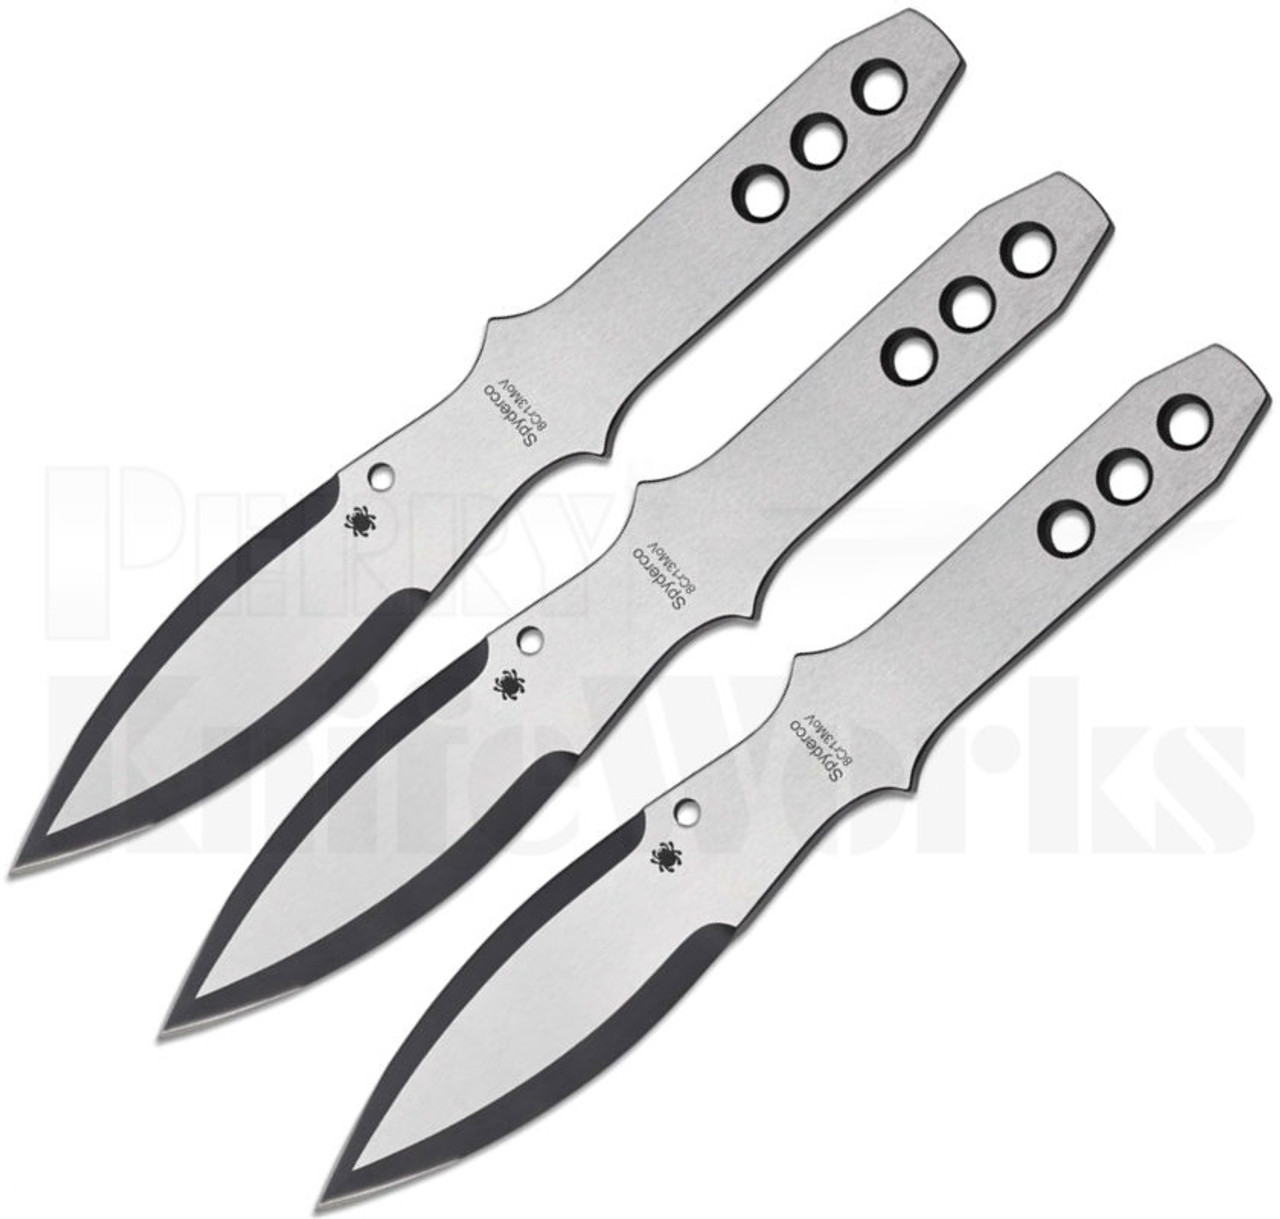 https://cdn11.bigcommerce.com/s-ar8byh/images/stencil/1280x1280/products/8374/27265/Spyderco-SpyderThrowers-Large-Throwing-Knives-TK01LG__46618.1675462751.jpg?c=2